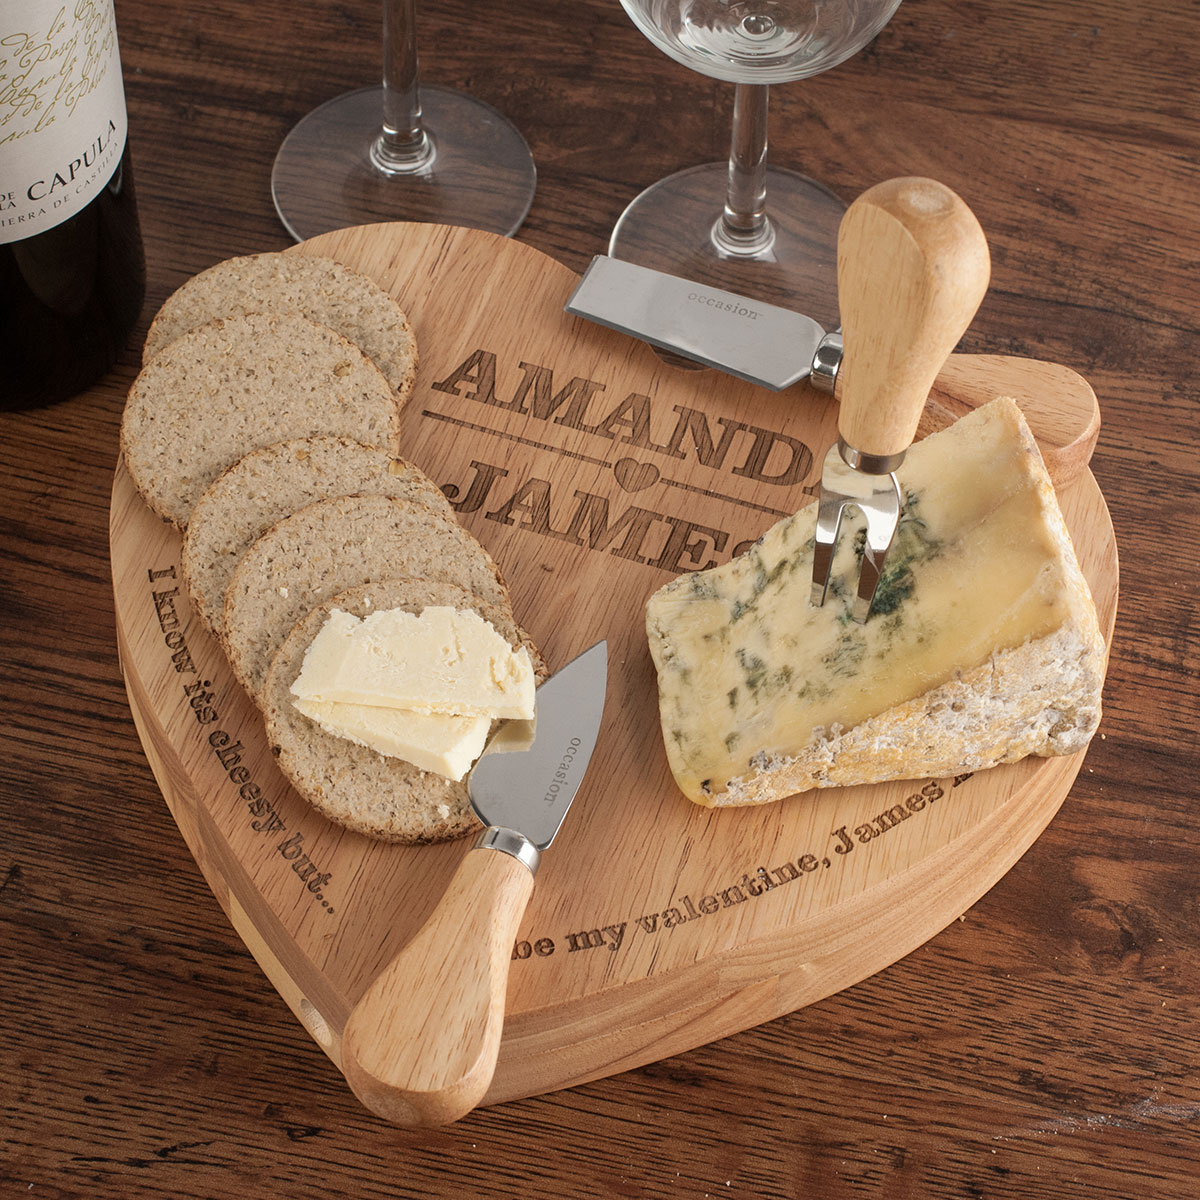 Personalised Engraved Heart Shaped Wooden Cheeseboard Set - Couples